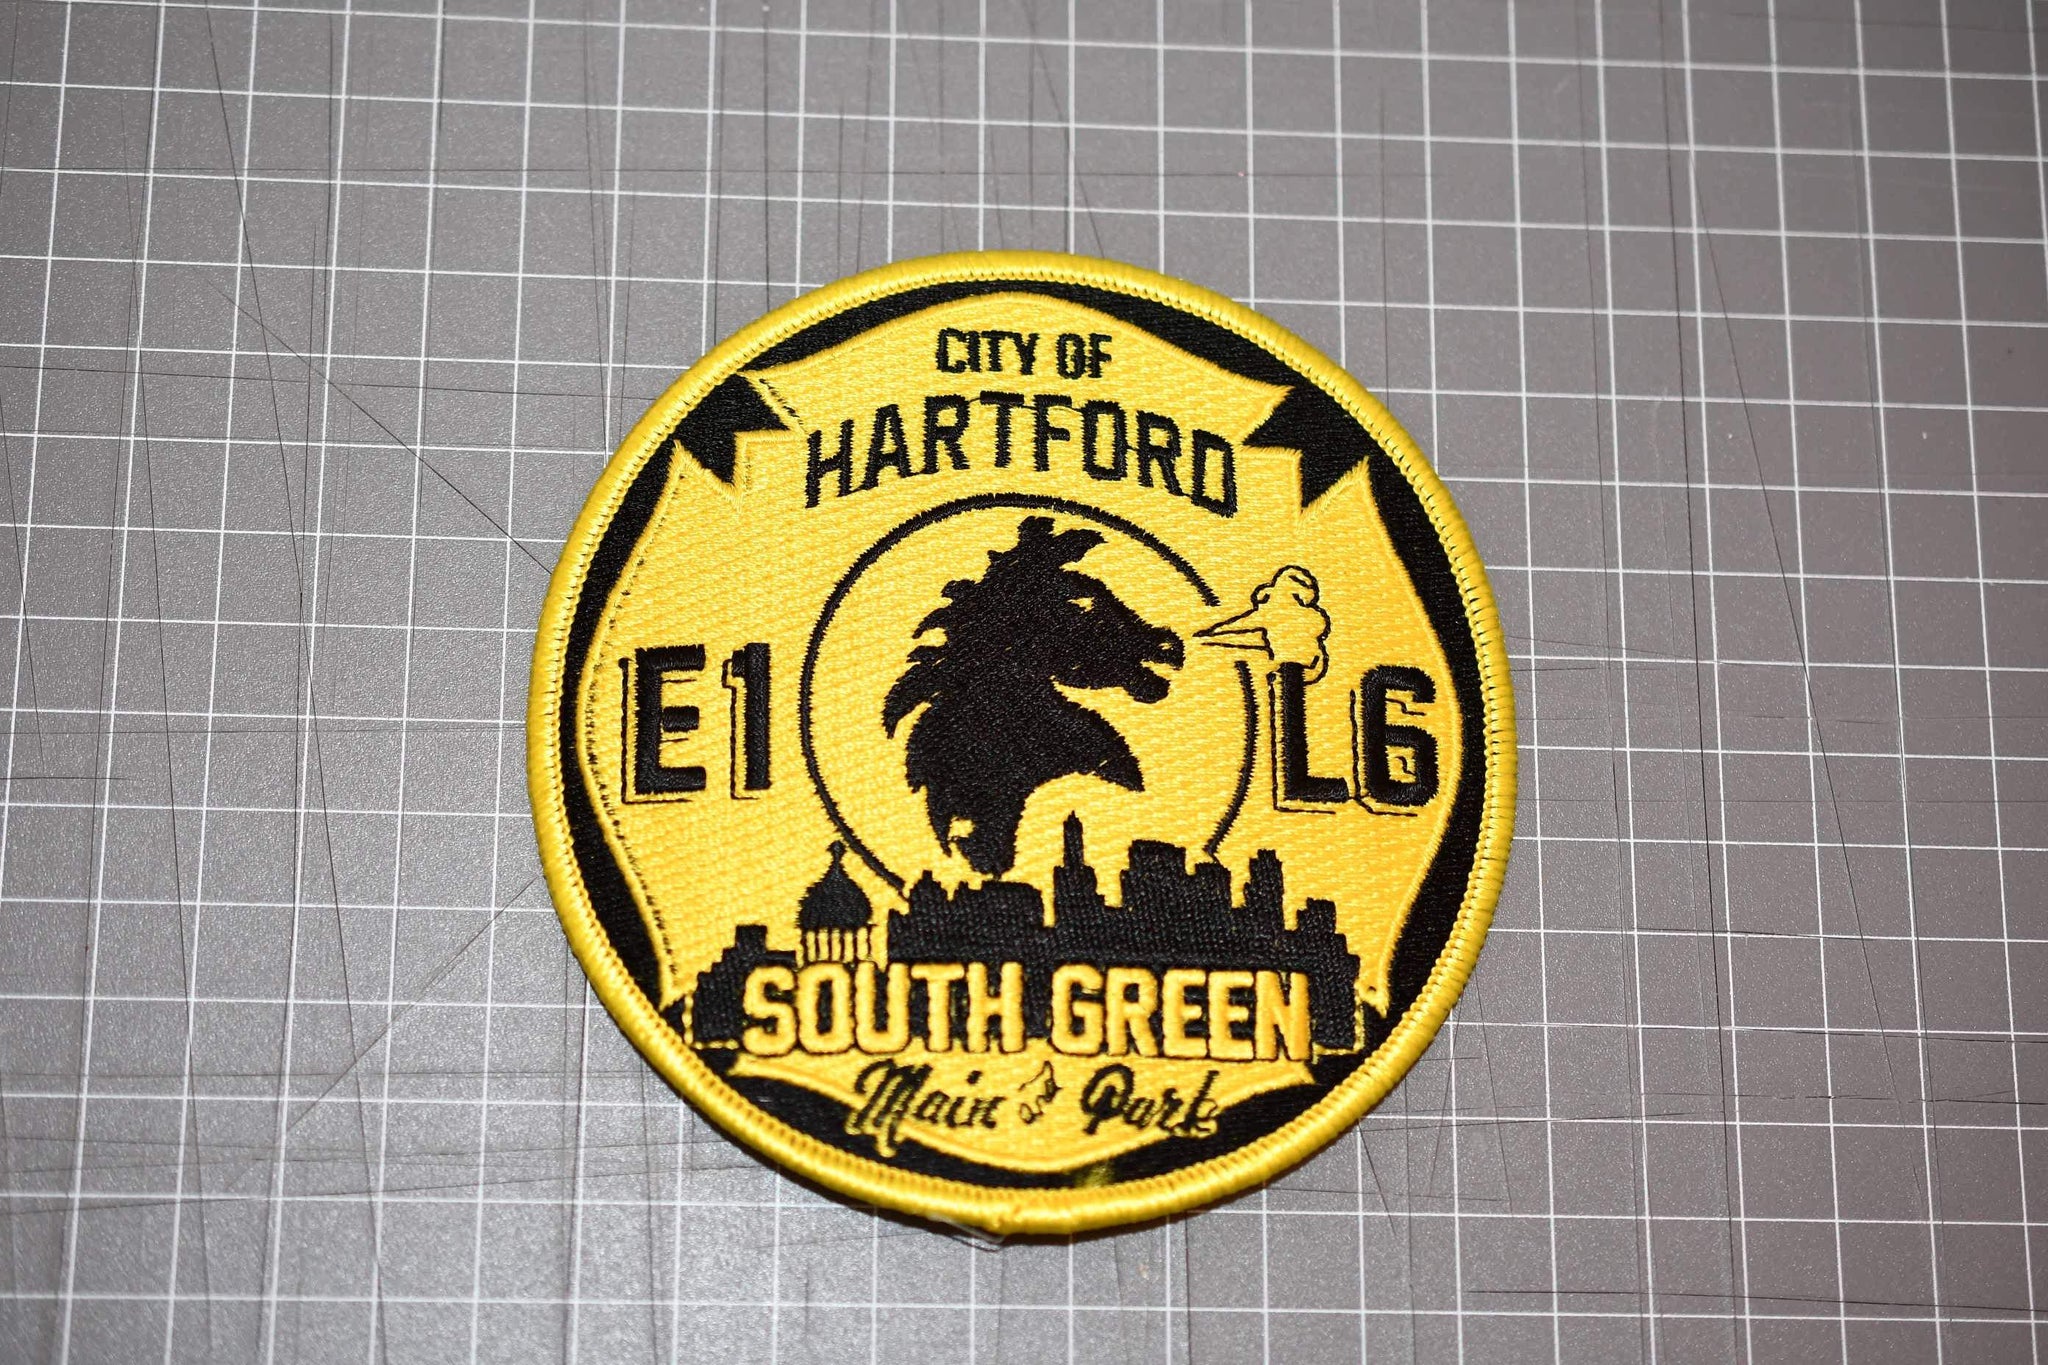 City Of Hartford Fire Department "South Green" Patch (B19)